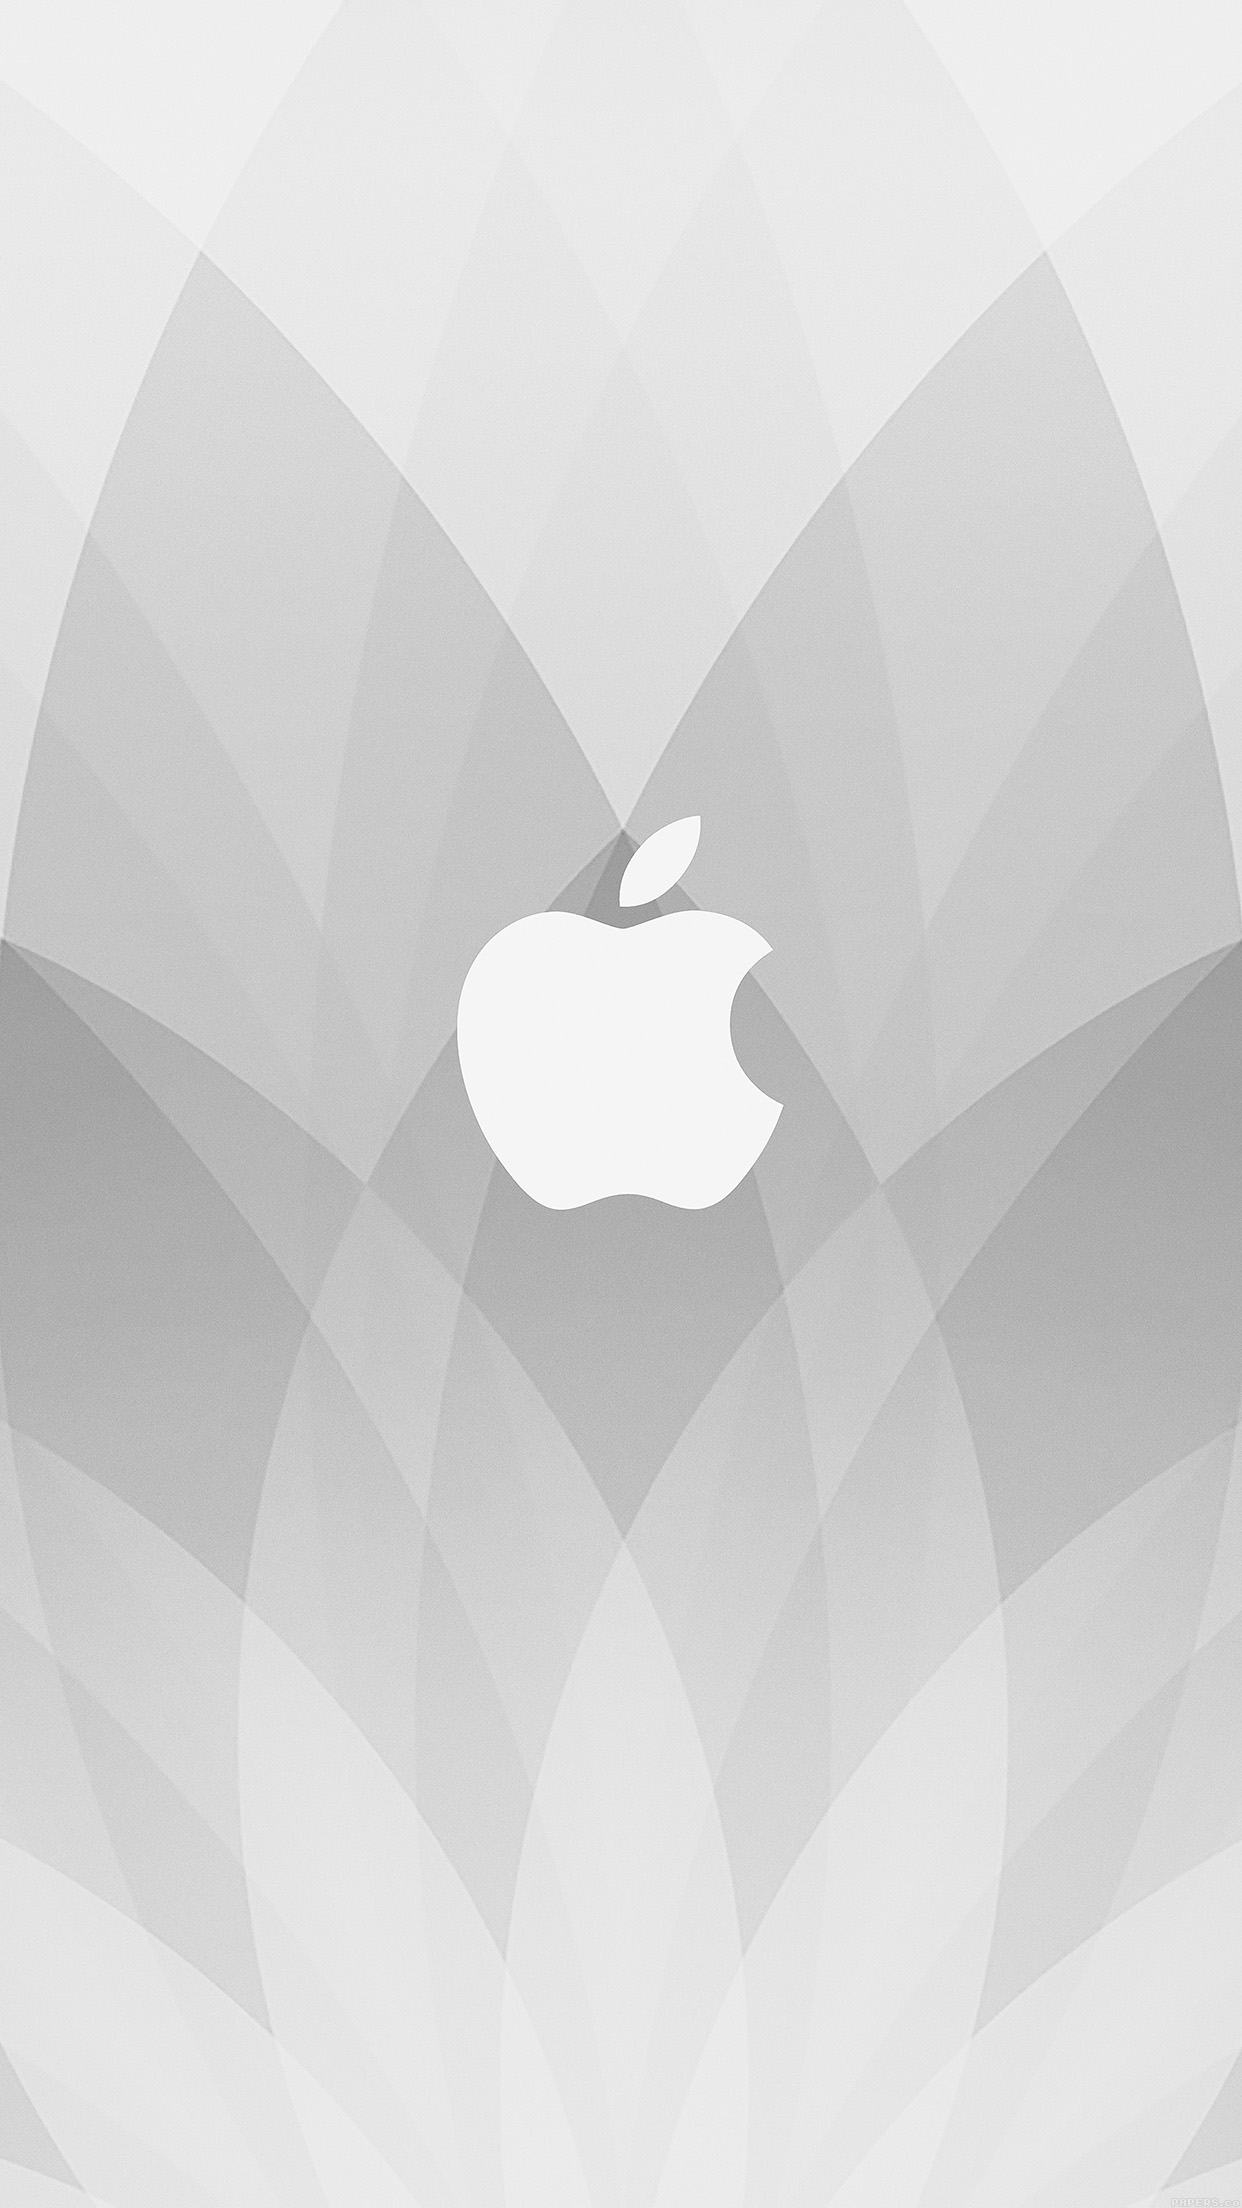 Apple Event March 2015 White Pattern Art Android wallpaper